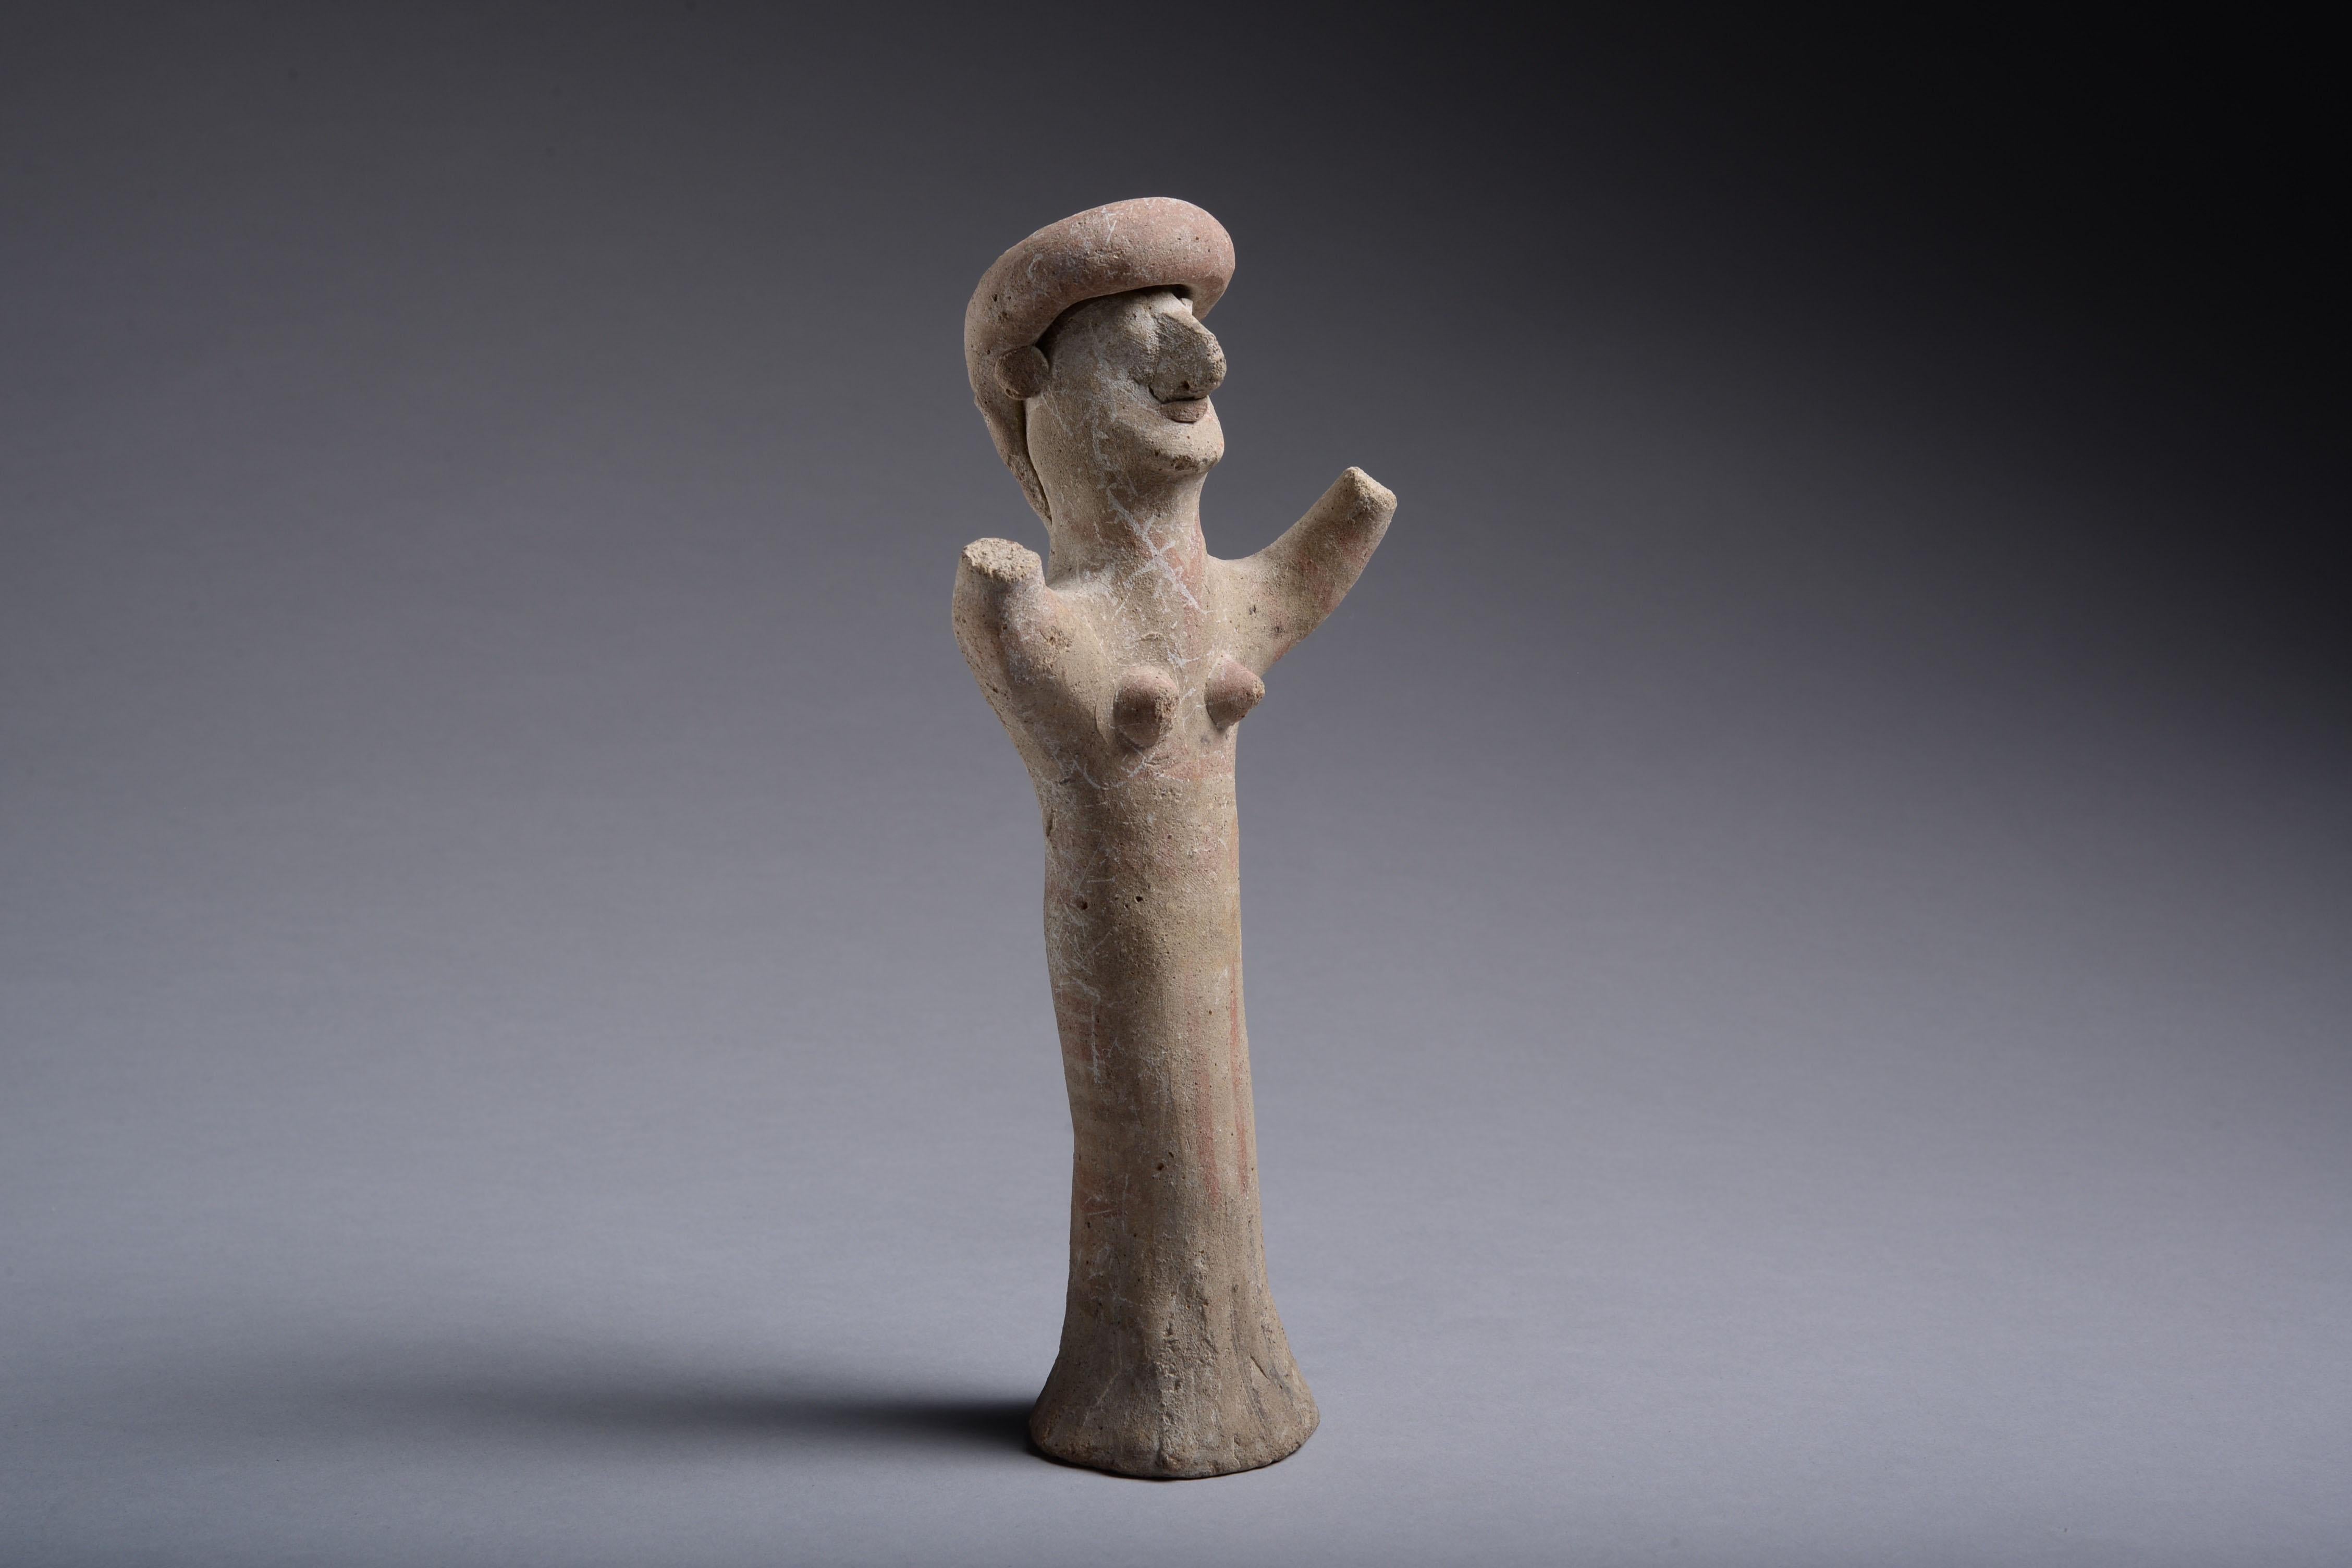 This confidently made statue depicts a goddess with raised arms, of a type normally found in fragments or overpainted.

The production of such figurines flourished during the Archaic period. Echoing Cyprus’s location as a meeting place between East